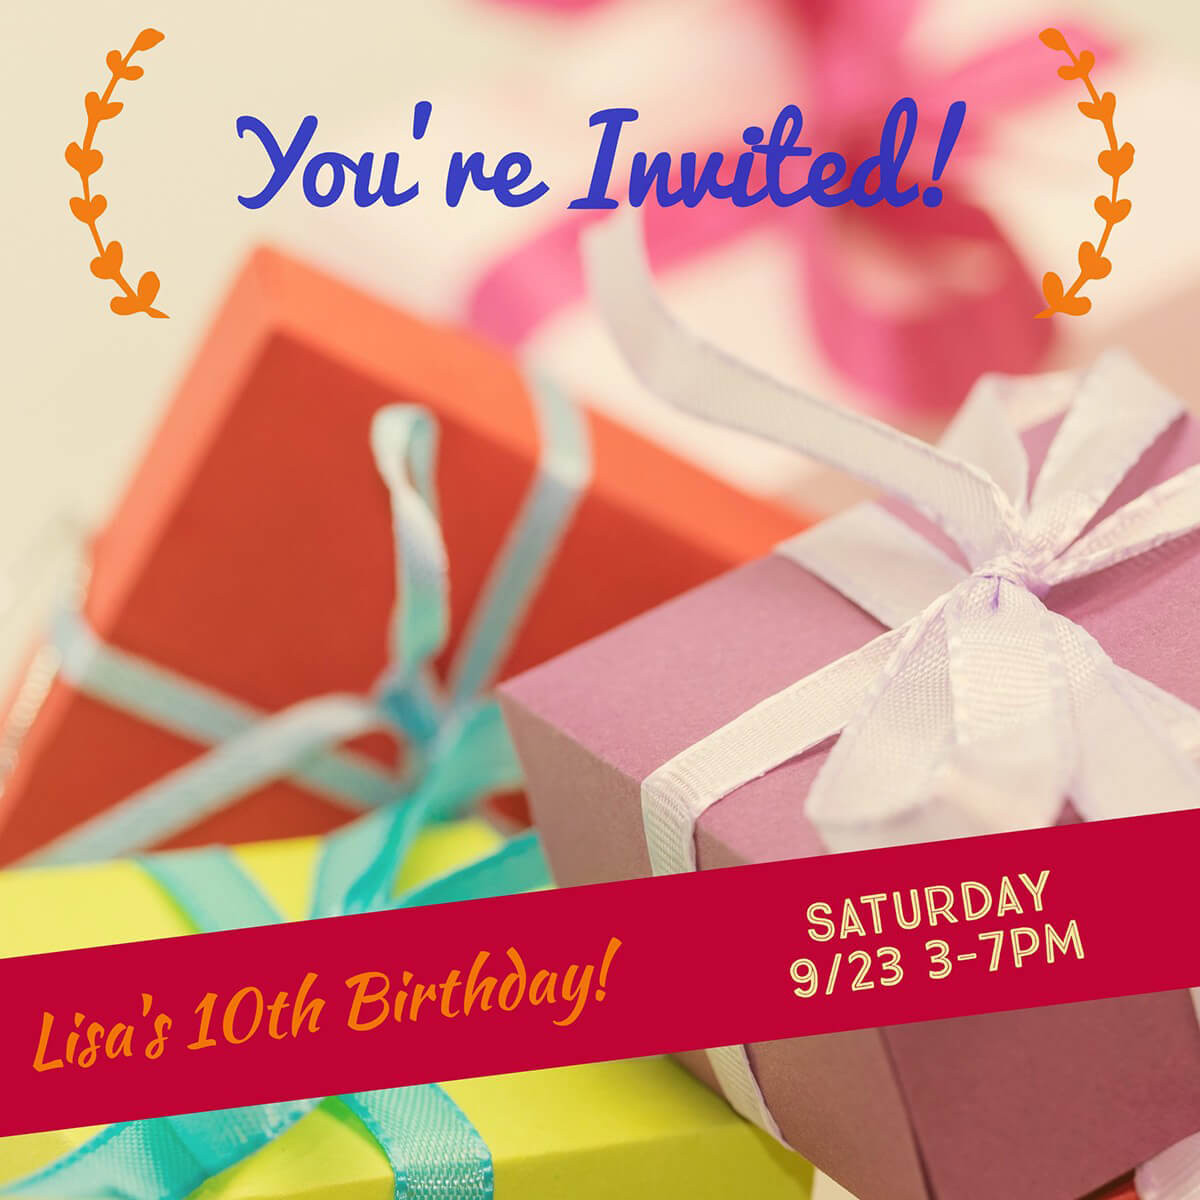 Make Your Own Birthday Invitations
 Make Your Own Birthday Invitations for Free